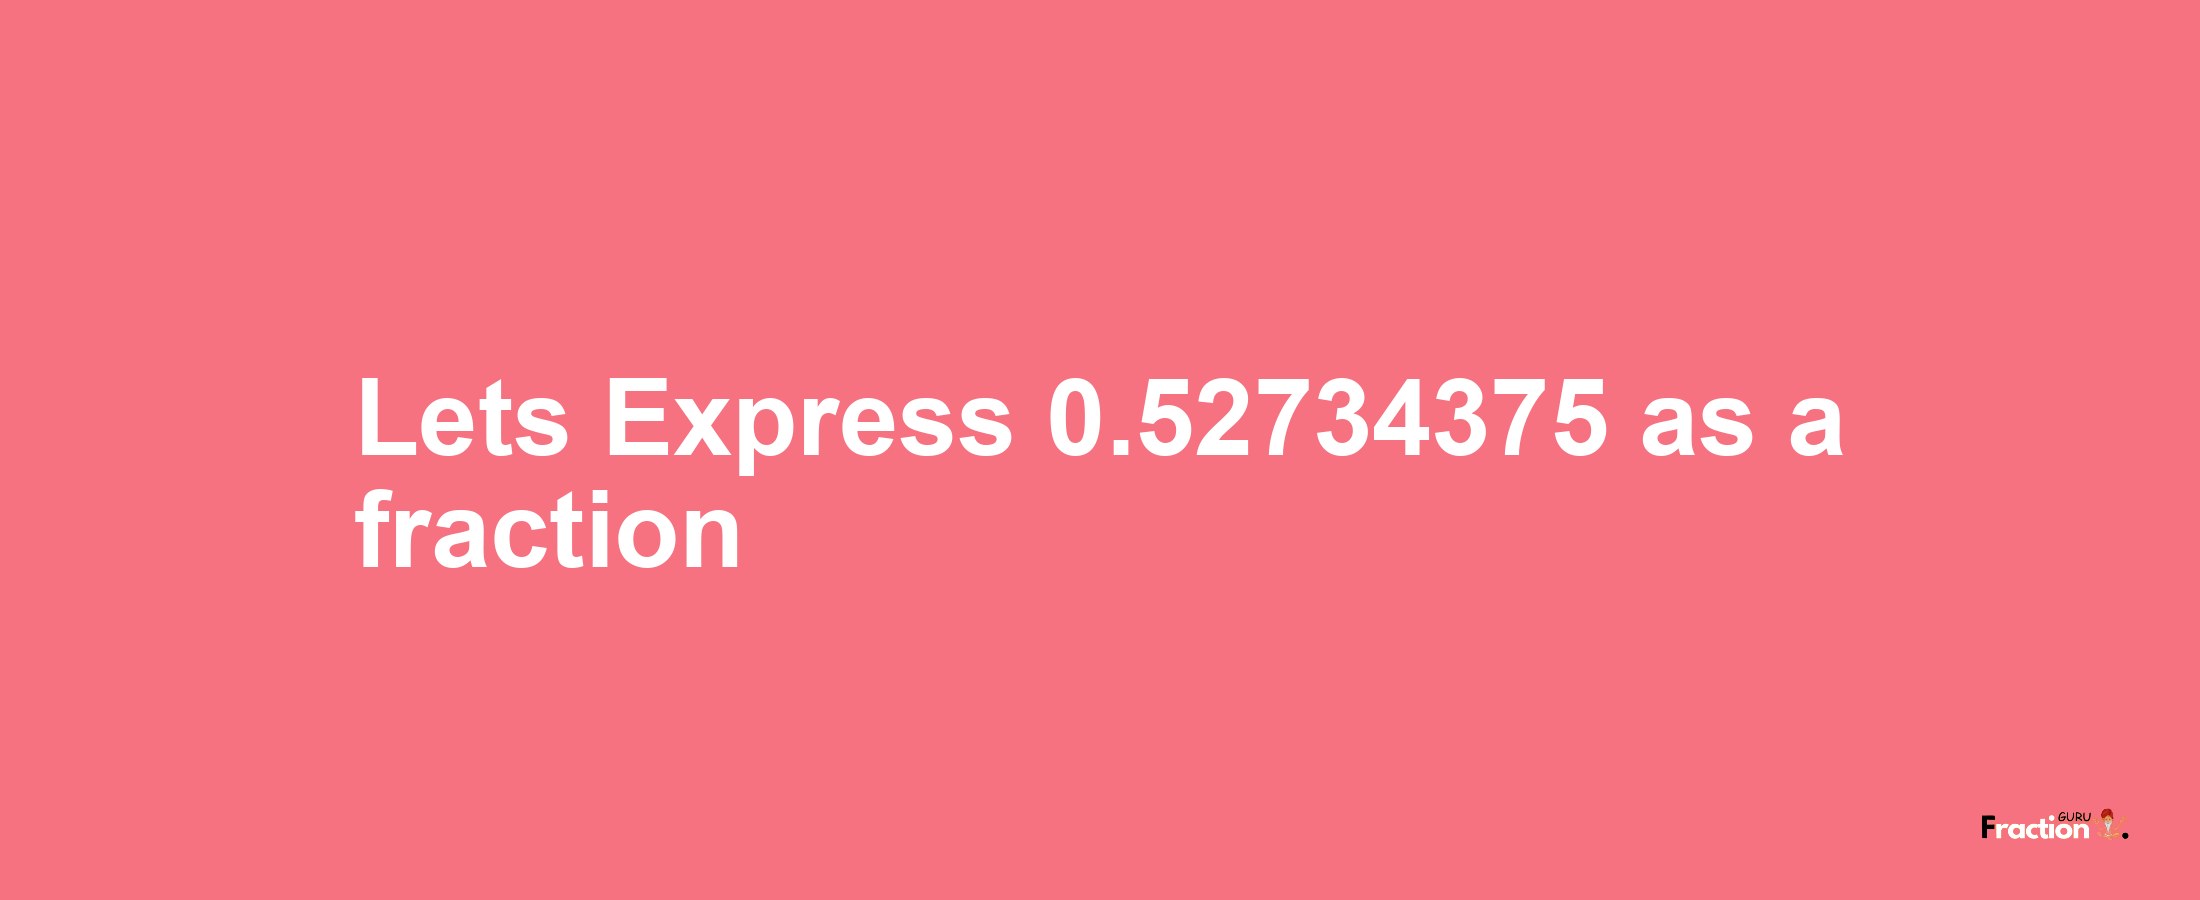 Lets Express 0.52734375 as afraction